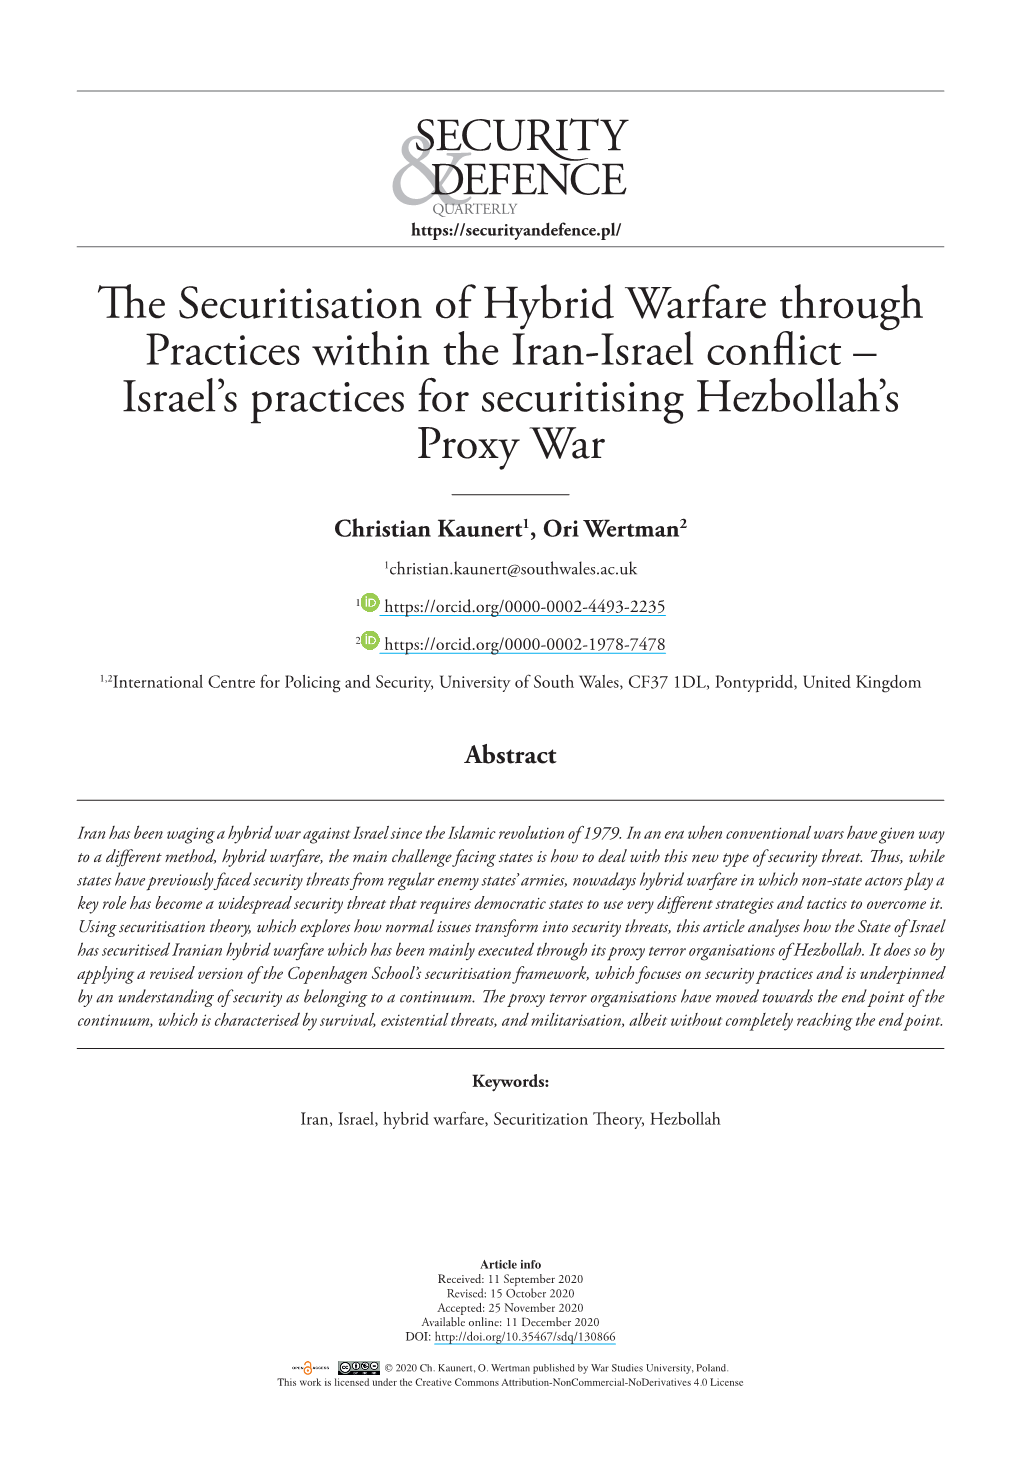 Israel's Practices for Securitising Hezbollah's Proxy